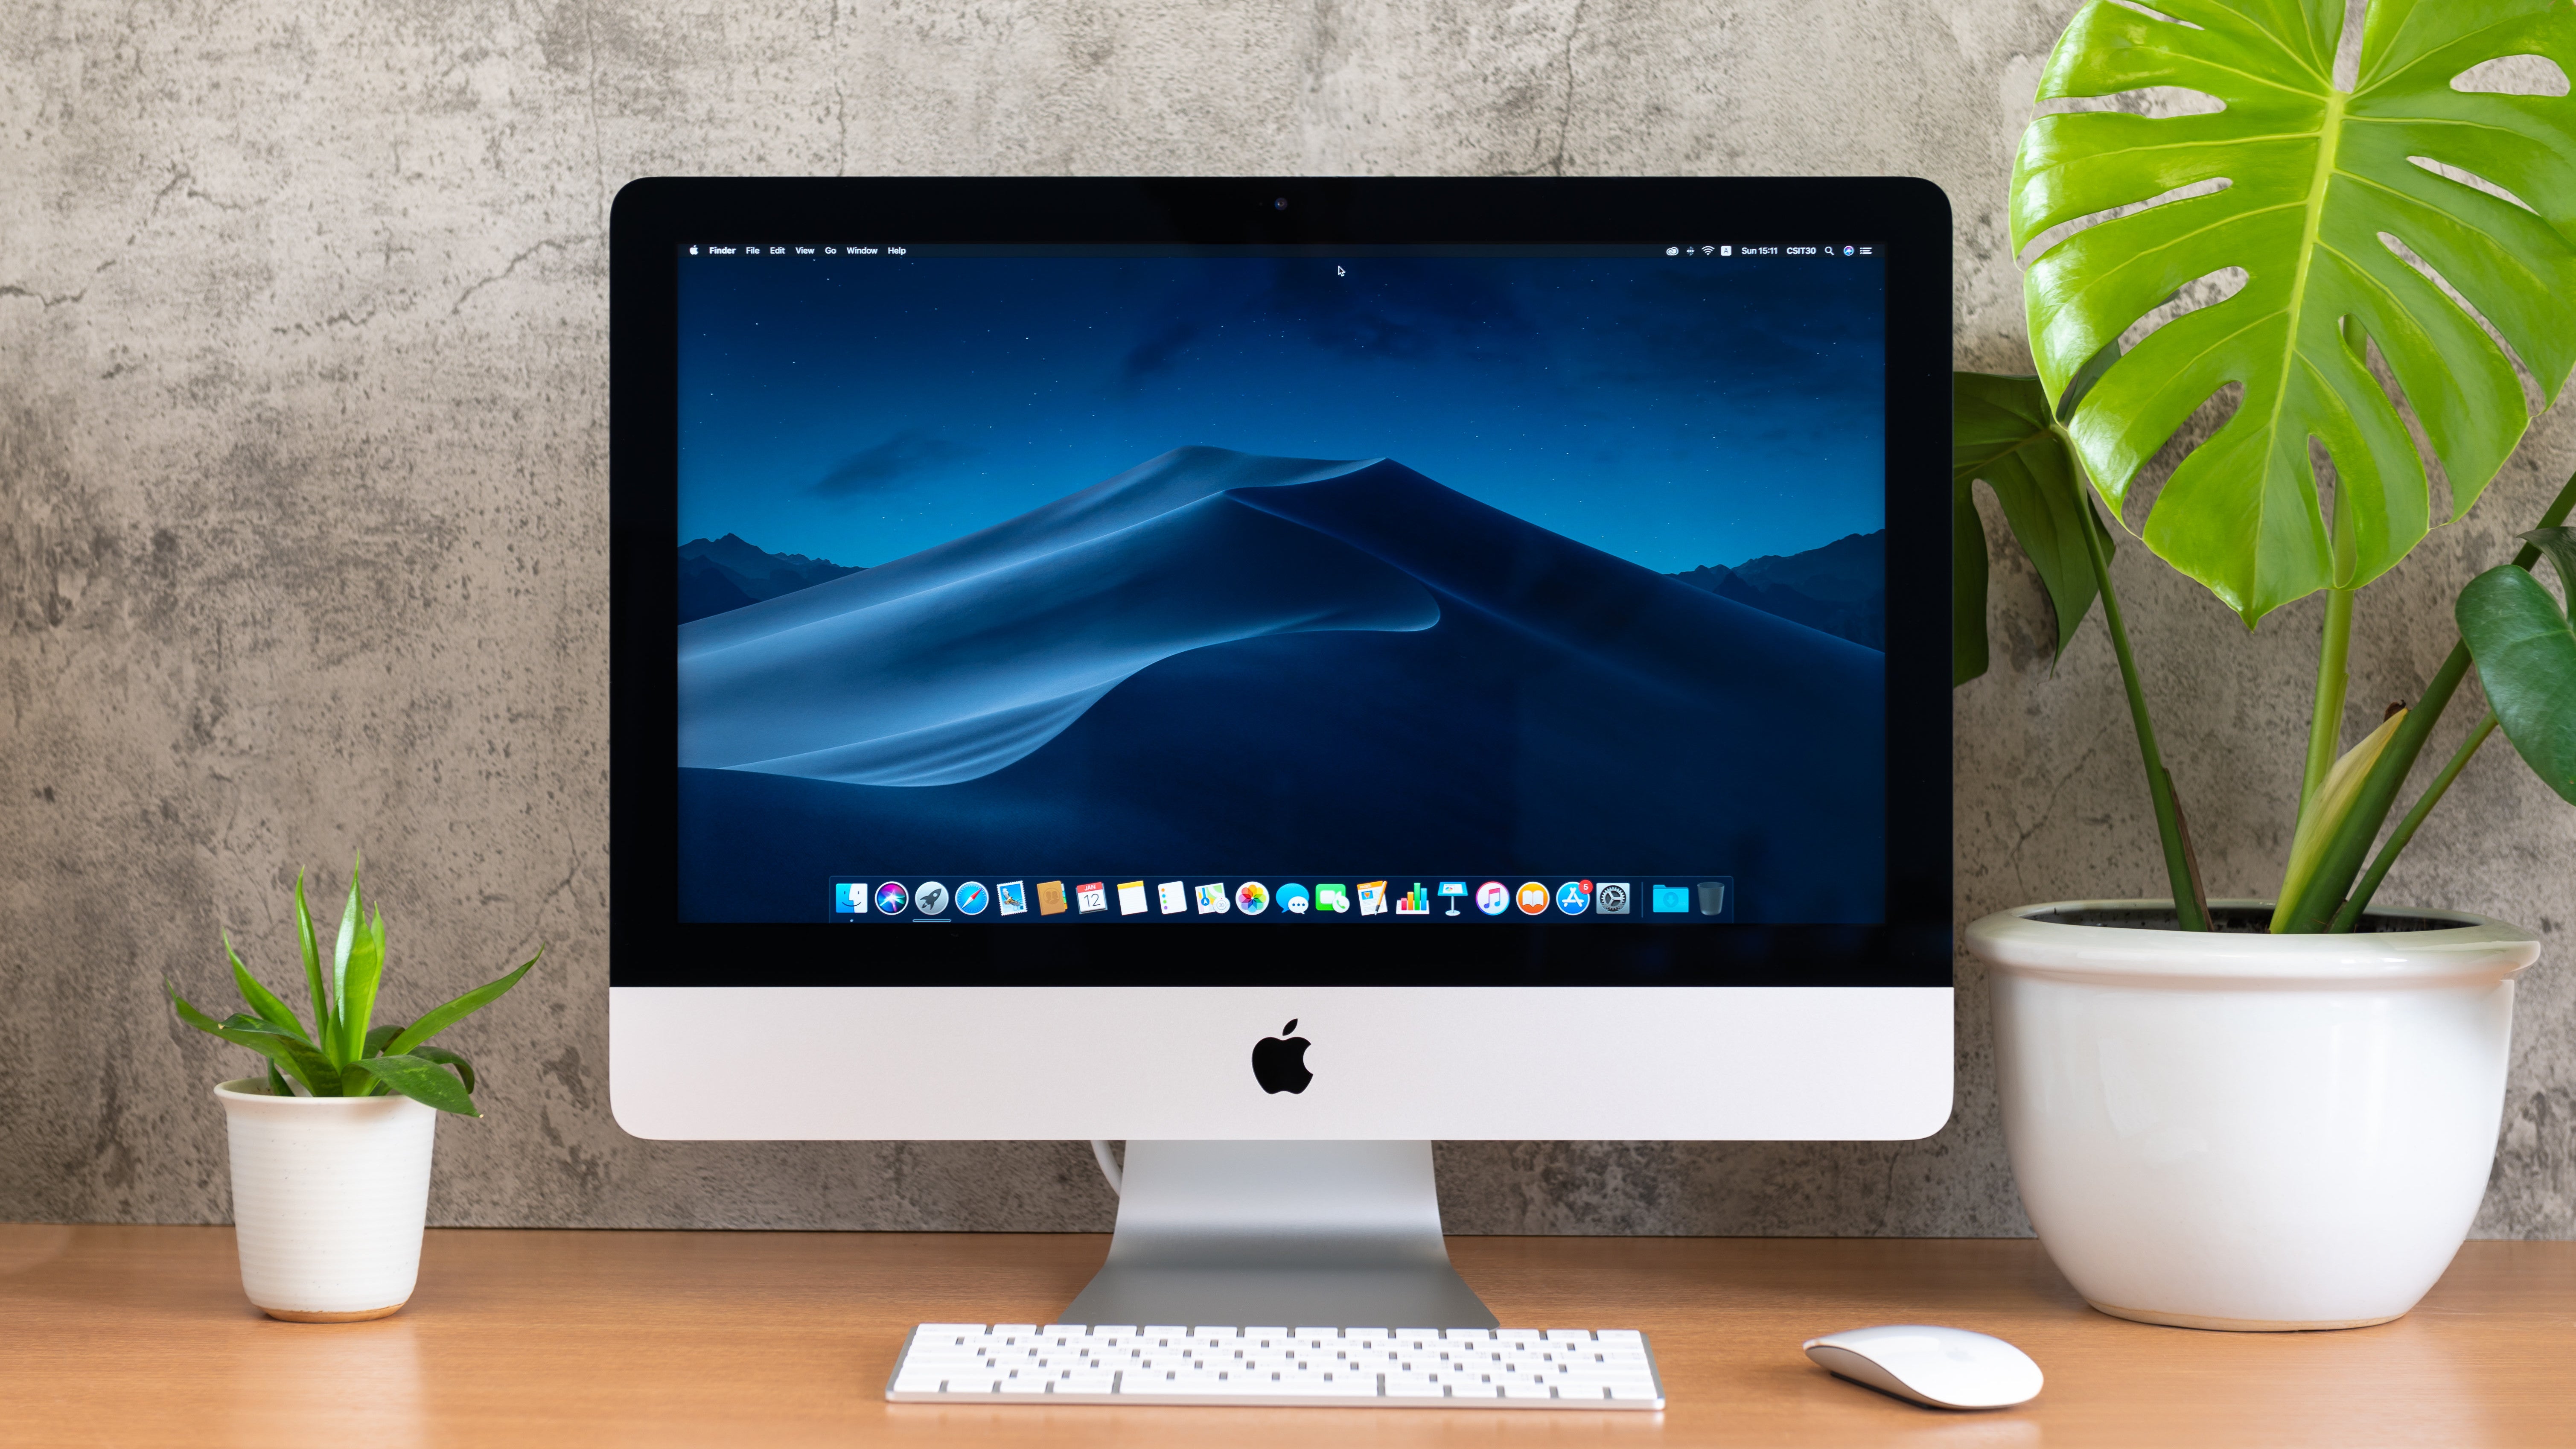 How To Protect Your Mac From Malware, Viruses And Other Assorted Junk